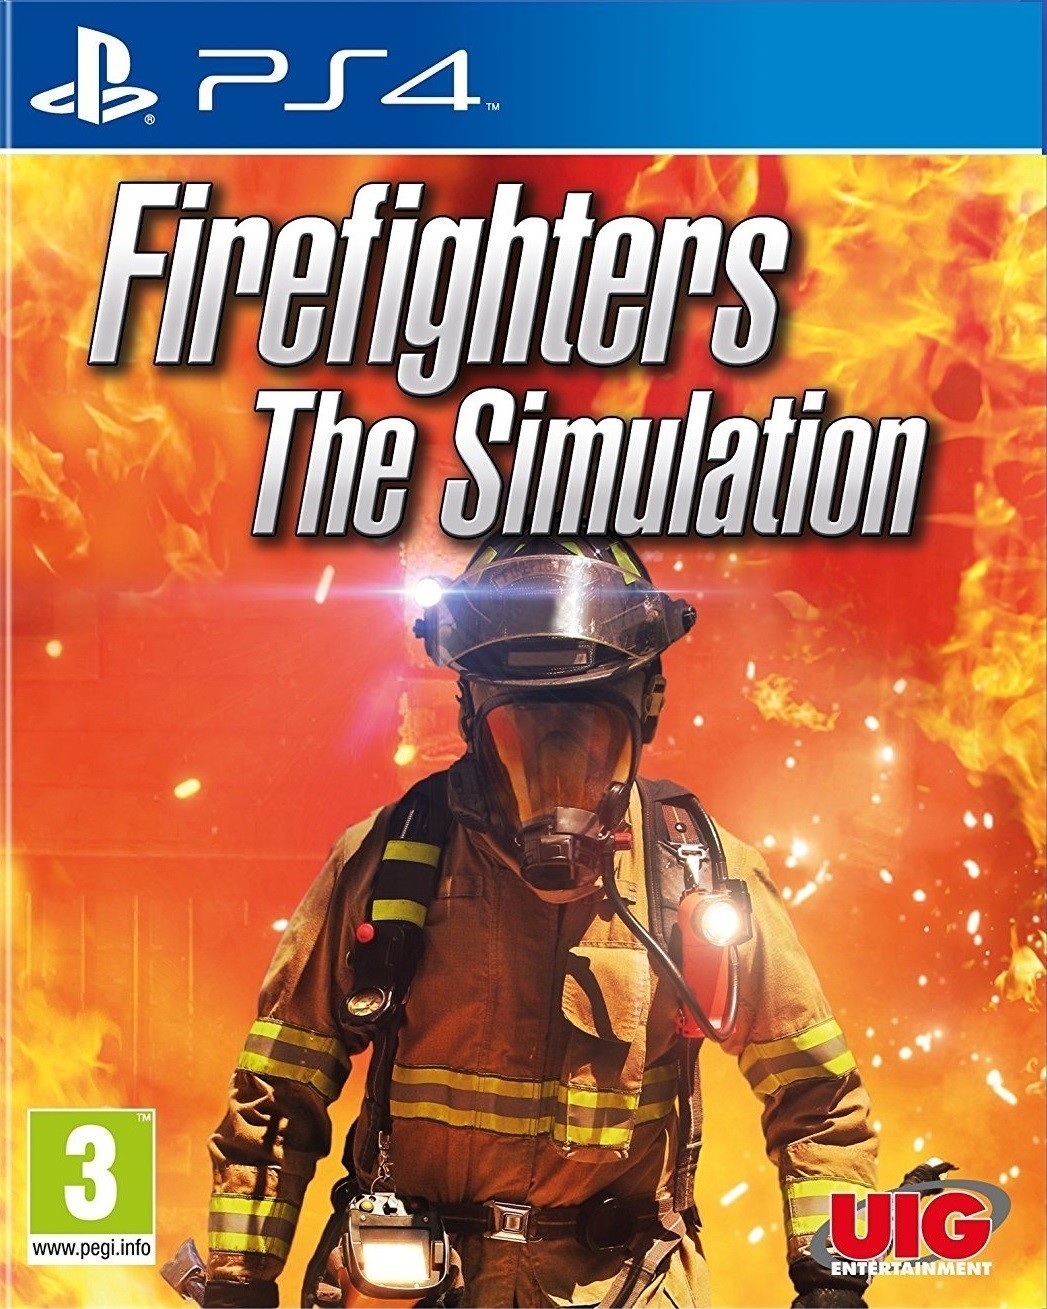 Firefighters the Simulation